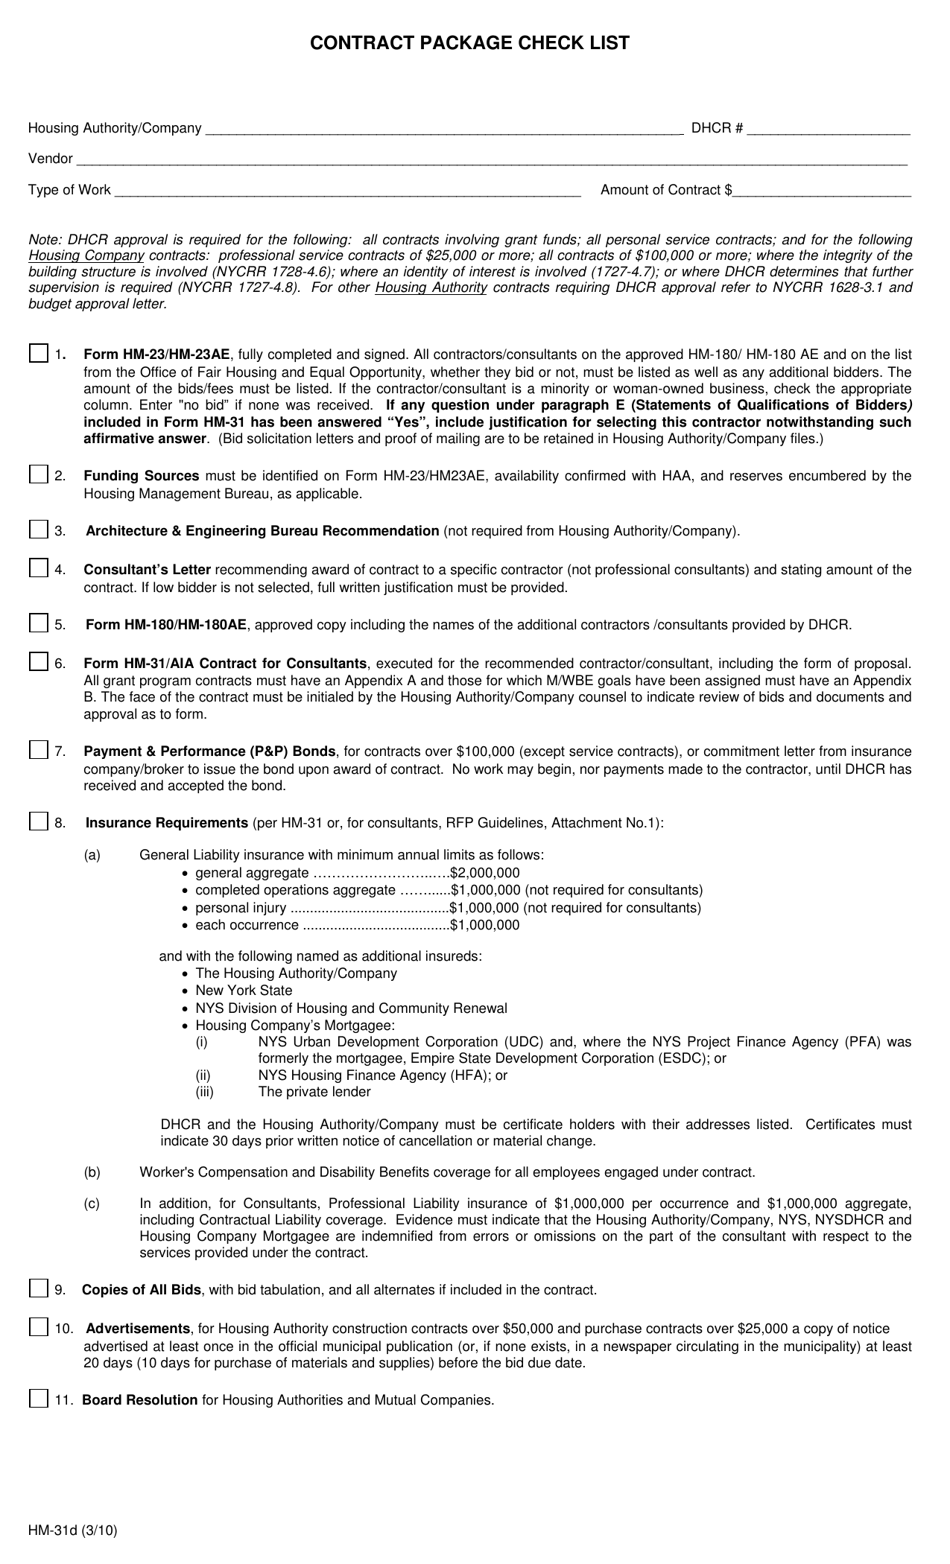 Form HM-31D Contract Package Check List - New York, Page 1